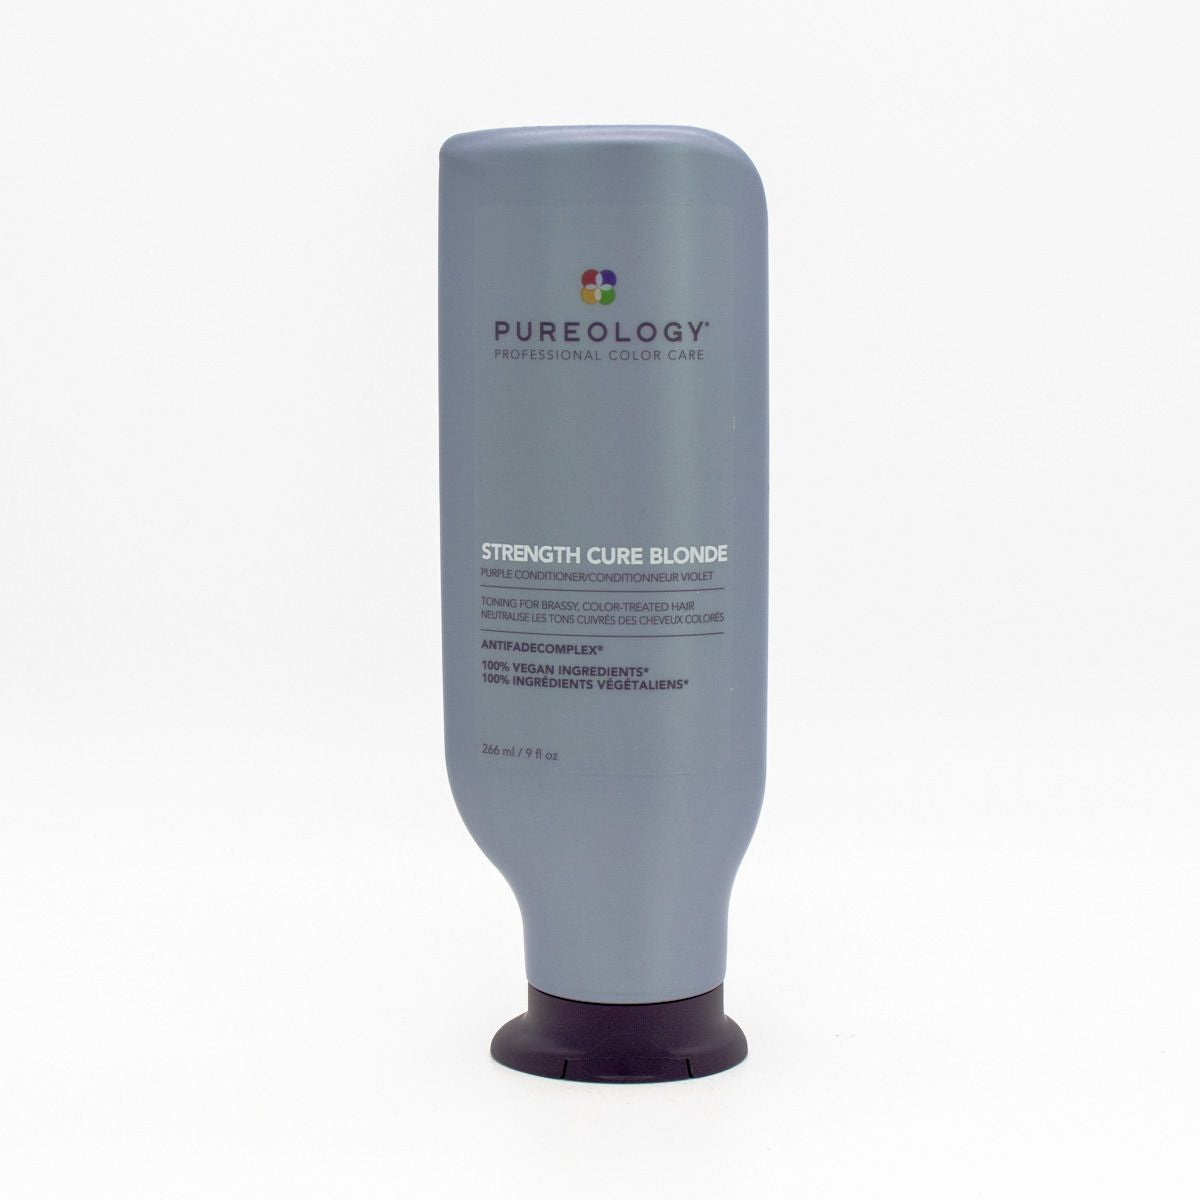 Pureology Strength Cure Blonde Conditioner 266ml - Imperfect Container